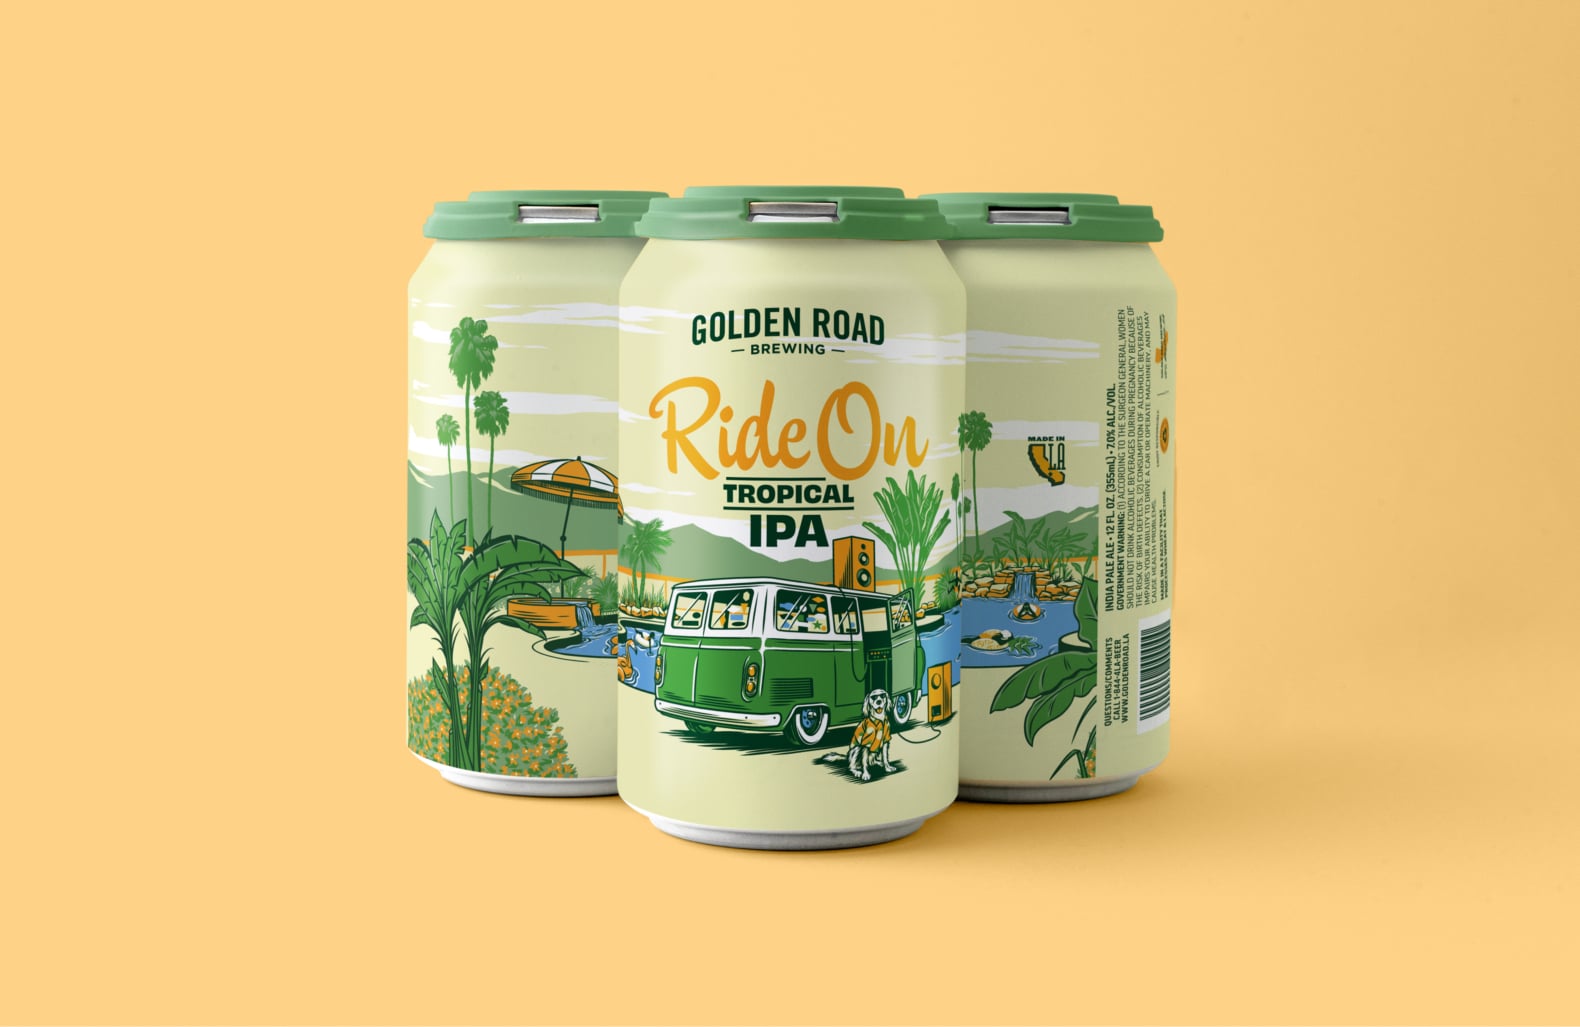 Three cans of Golden Road Ride On Tropical IPA against a yellow background. The can is greenish yellow with an illustration of a vintage green van parked next to a pool. The van has vintage speakers attached to its radio. A dog sits next to the van, implausibly wearing sunglasses and a Hawaiian shirt. The beer name "Ride On Tropic IPA" is shown in playful orange script and dark green block letters.